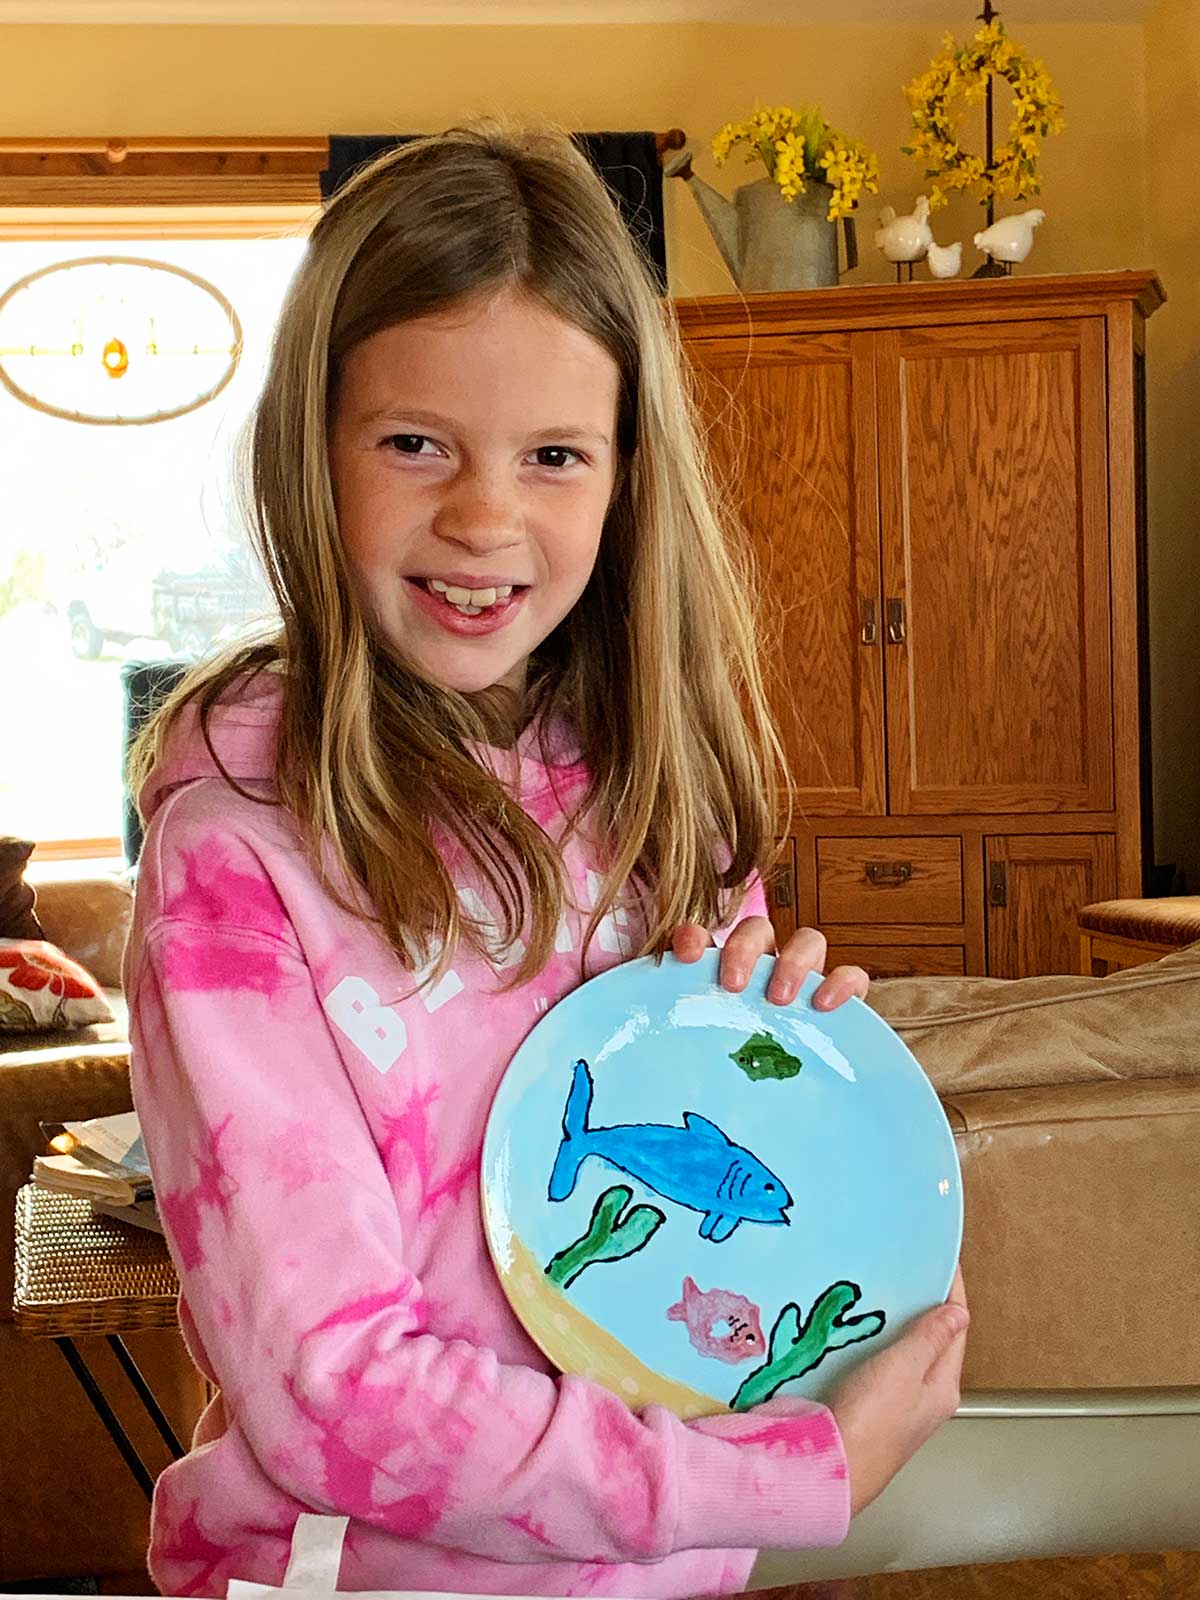 Young girl with light brown hair and brown eyes wearing a pink sweatshirt shows off her completed pottery project of a plate with a shark and ocean scene painted on it.